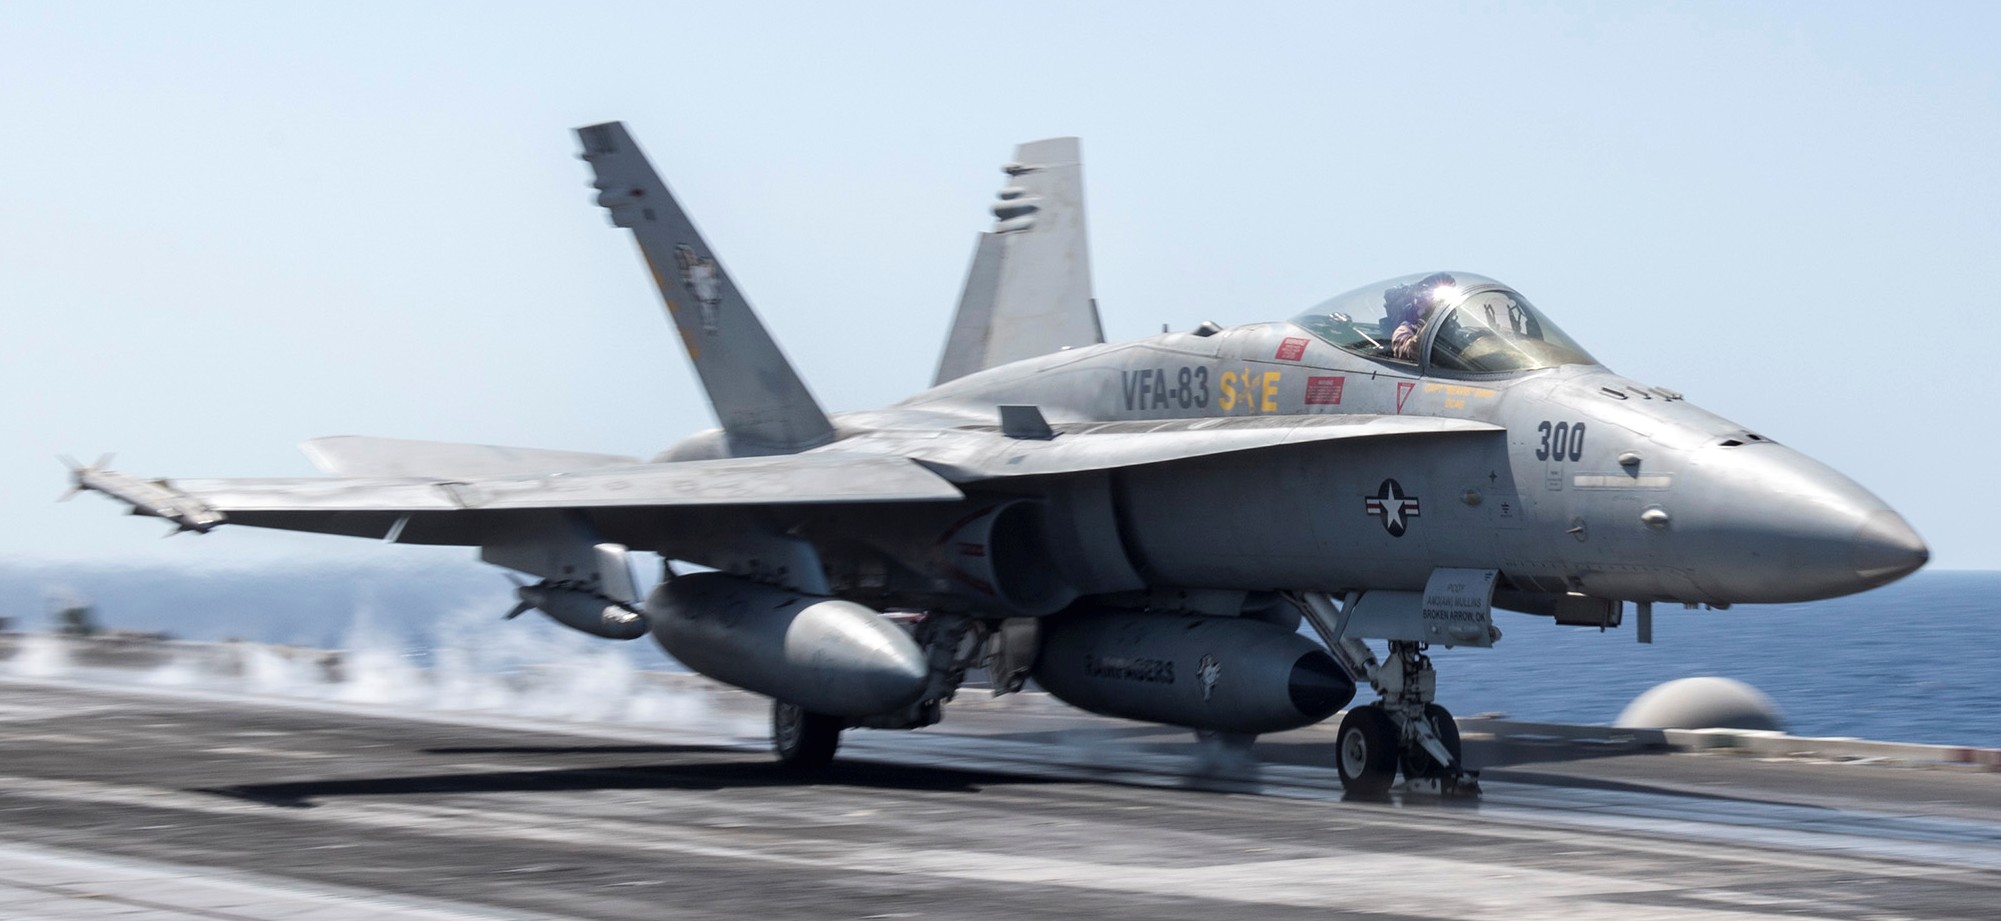 vfa-83 rampagers strike fighter squadron f/a-18c hornet cvw-7 uss harry s. truman cvn-75 51p